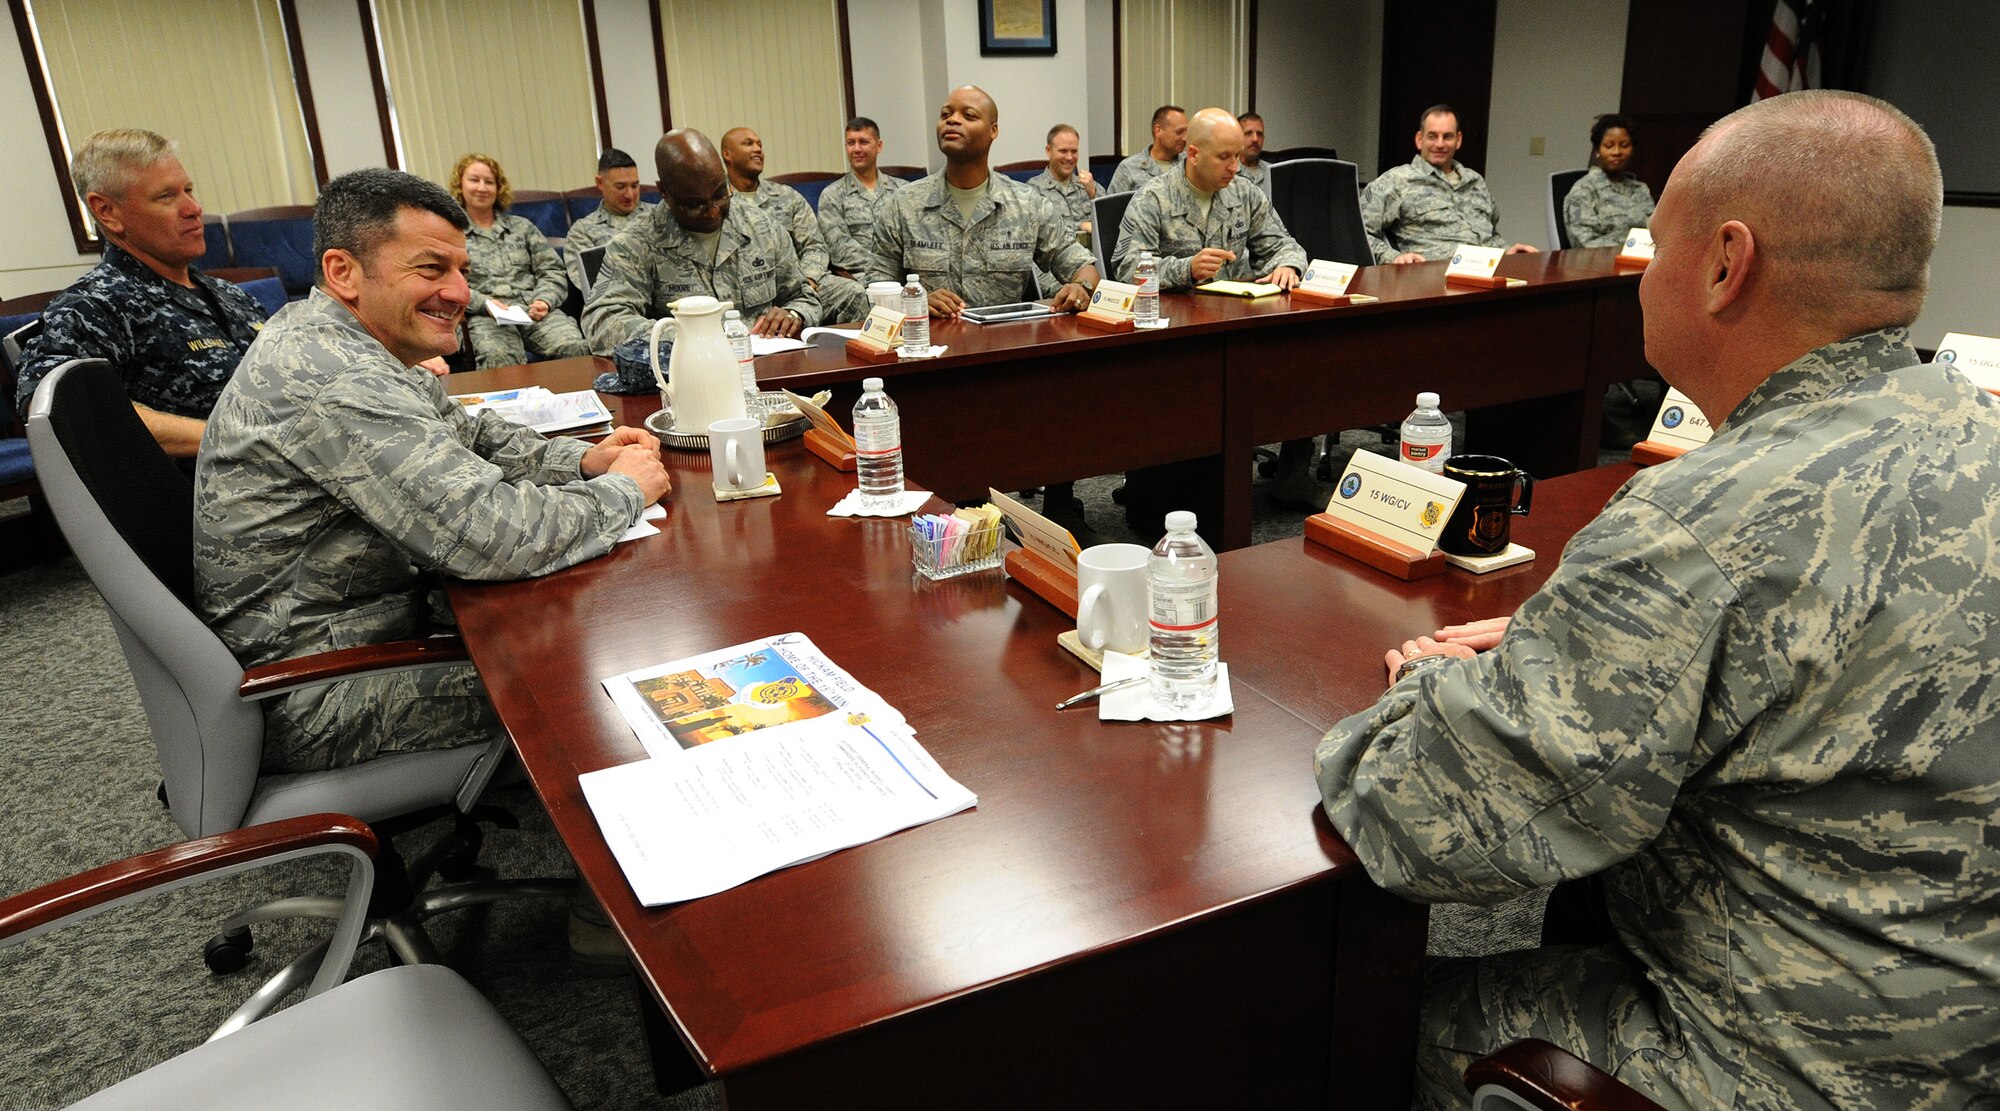 Lt. Gen. Russell Handy, 11th Air Force commander, meets with 15th Wing senior leaders during a visit to the 15th Wing headquarters at Joint Base Pearl Harbor-Hickam, Hawaii, Jan. 21, 2014. Handy assumed command of the 11th AF in August 2013. (U.S. Air Force photo/Master Sgt. Jerome S. Tayborn)